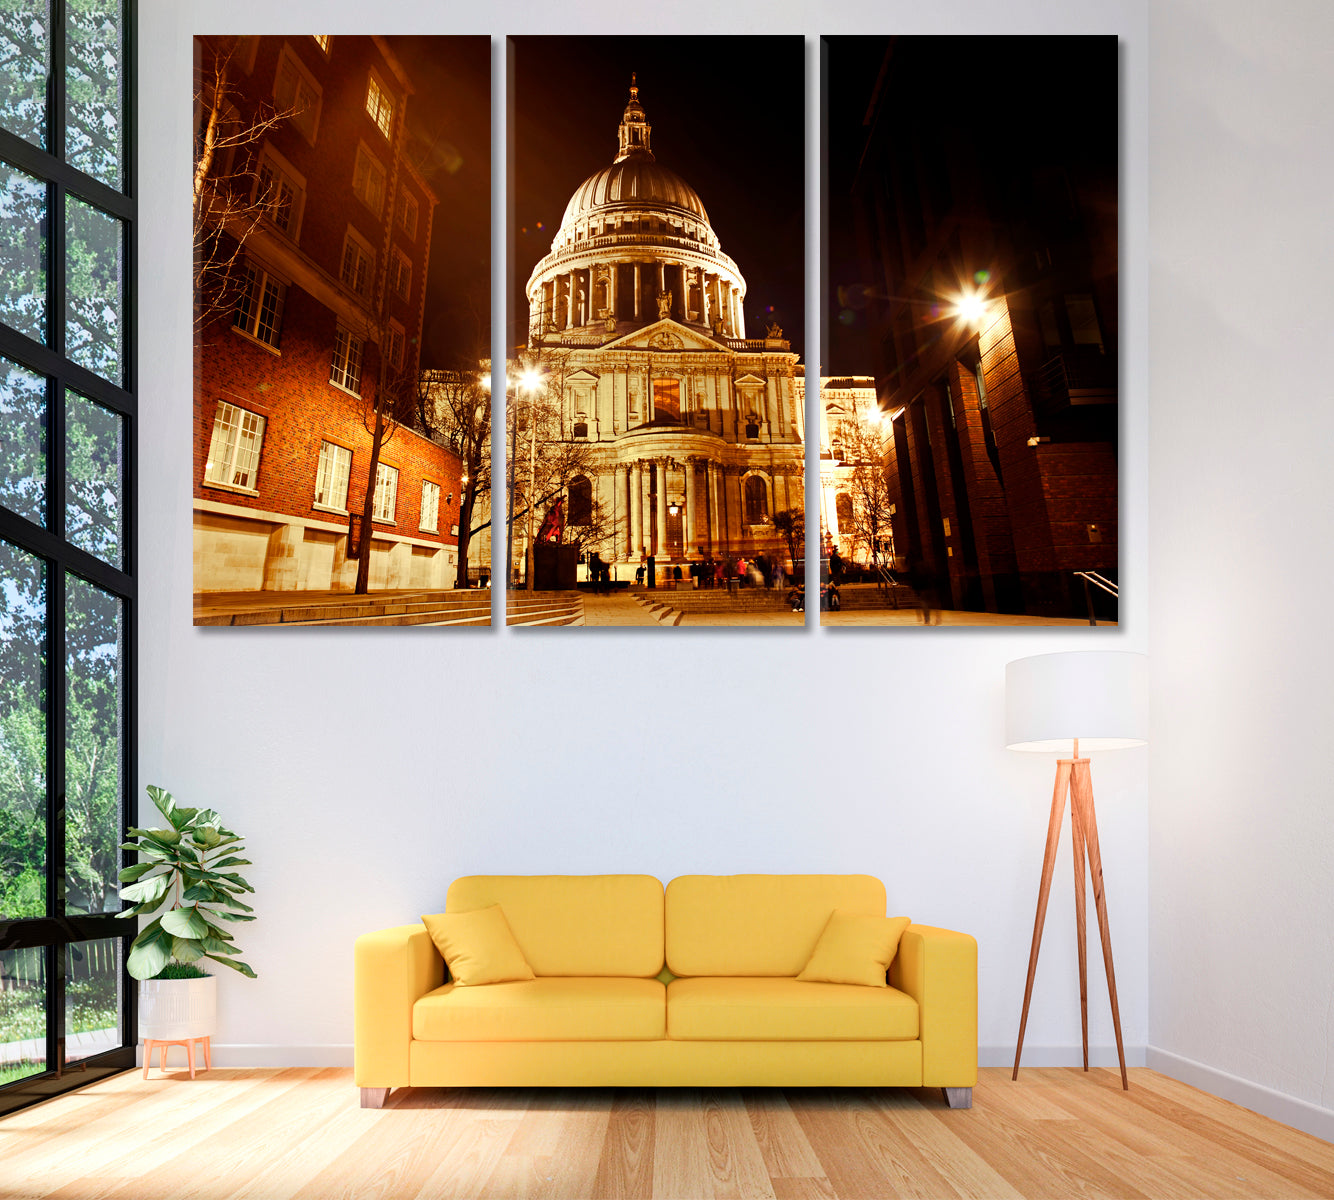 St Paul's Cathedral at Night London Canvas Print ArtLexy 3 Panels 36"x24" inches 